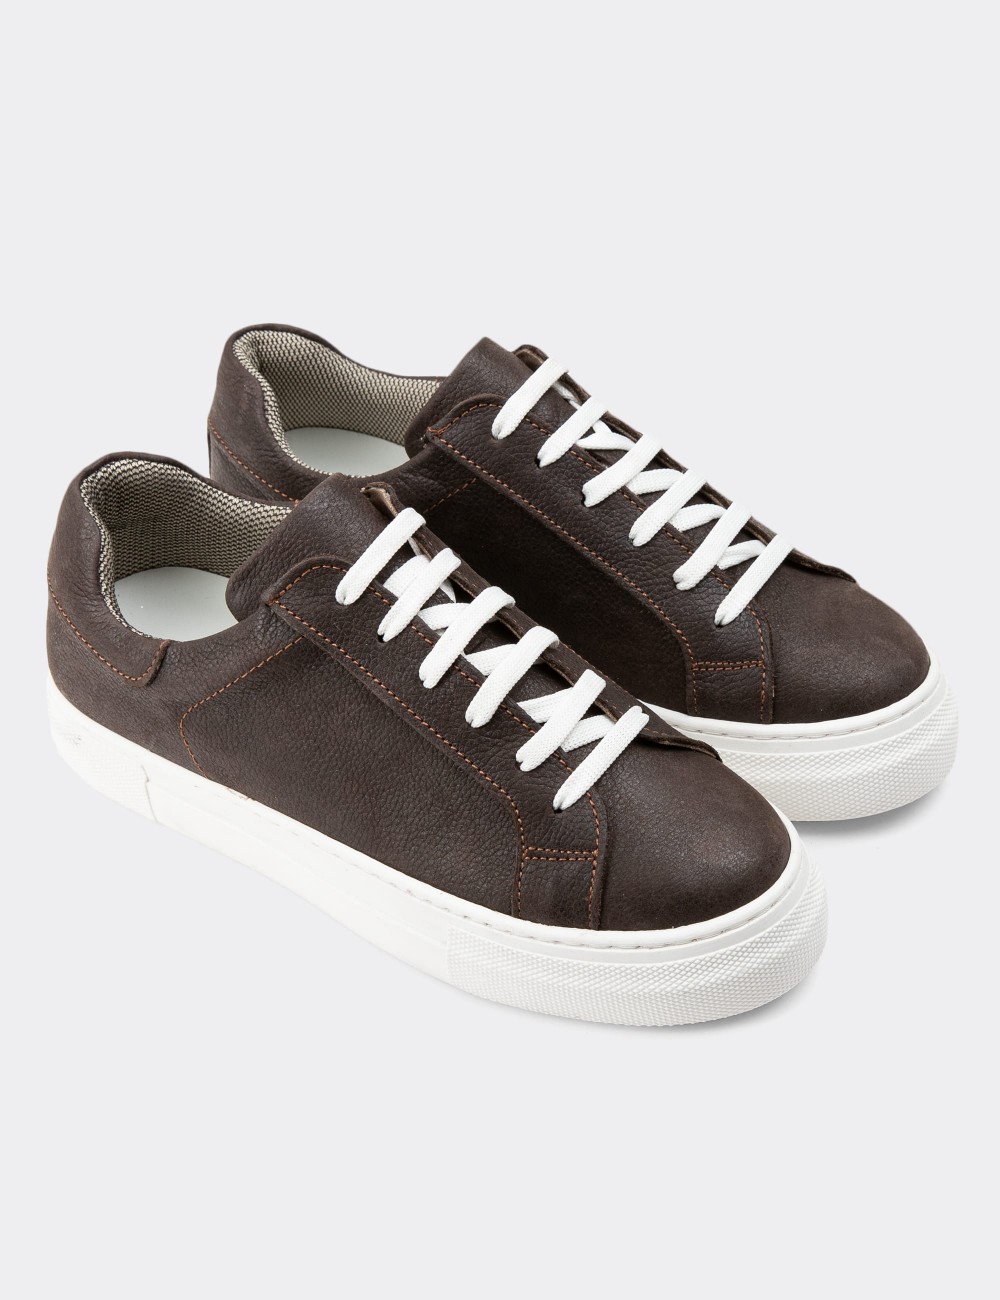 Brown Leather Sneakers - Z1681ZKHVC27